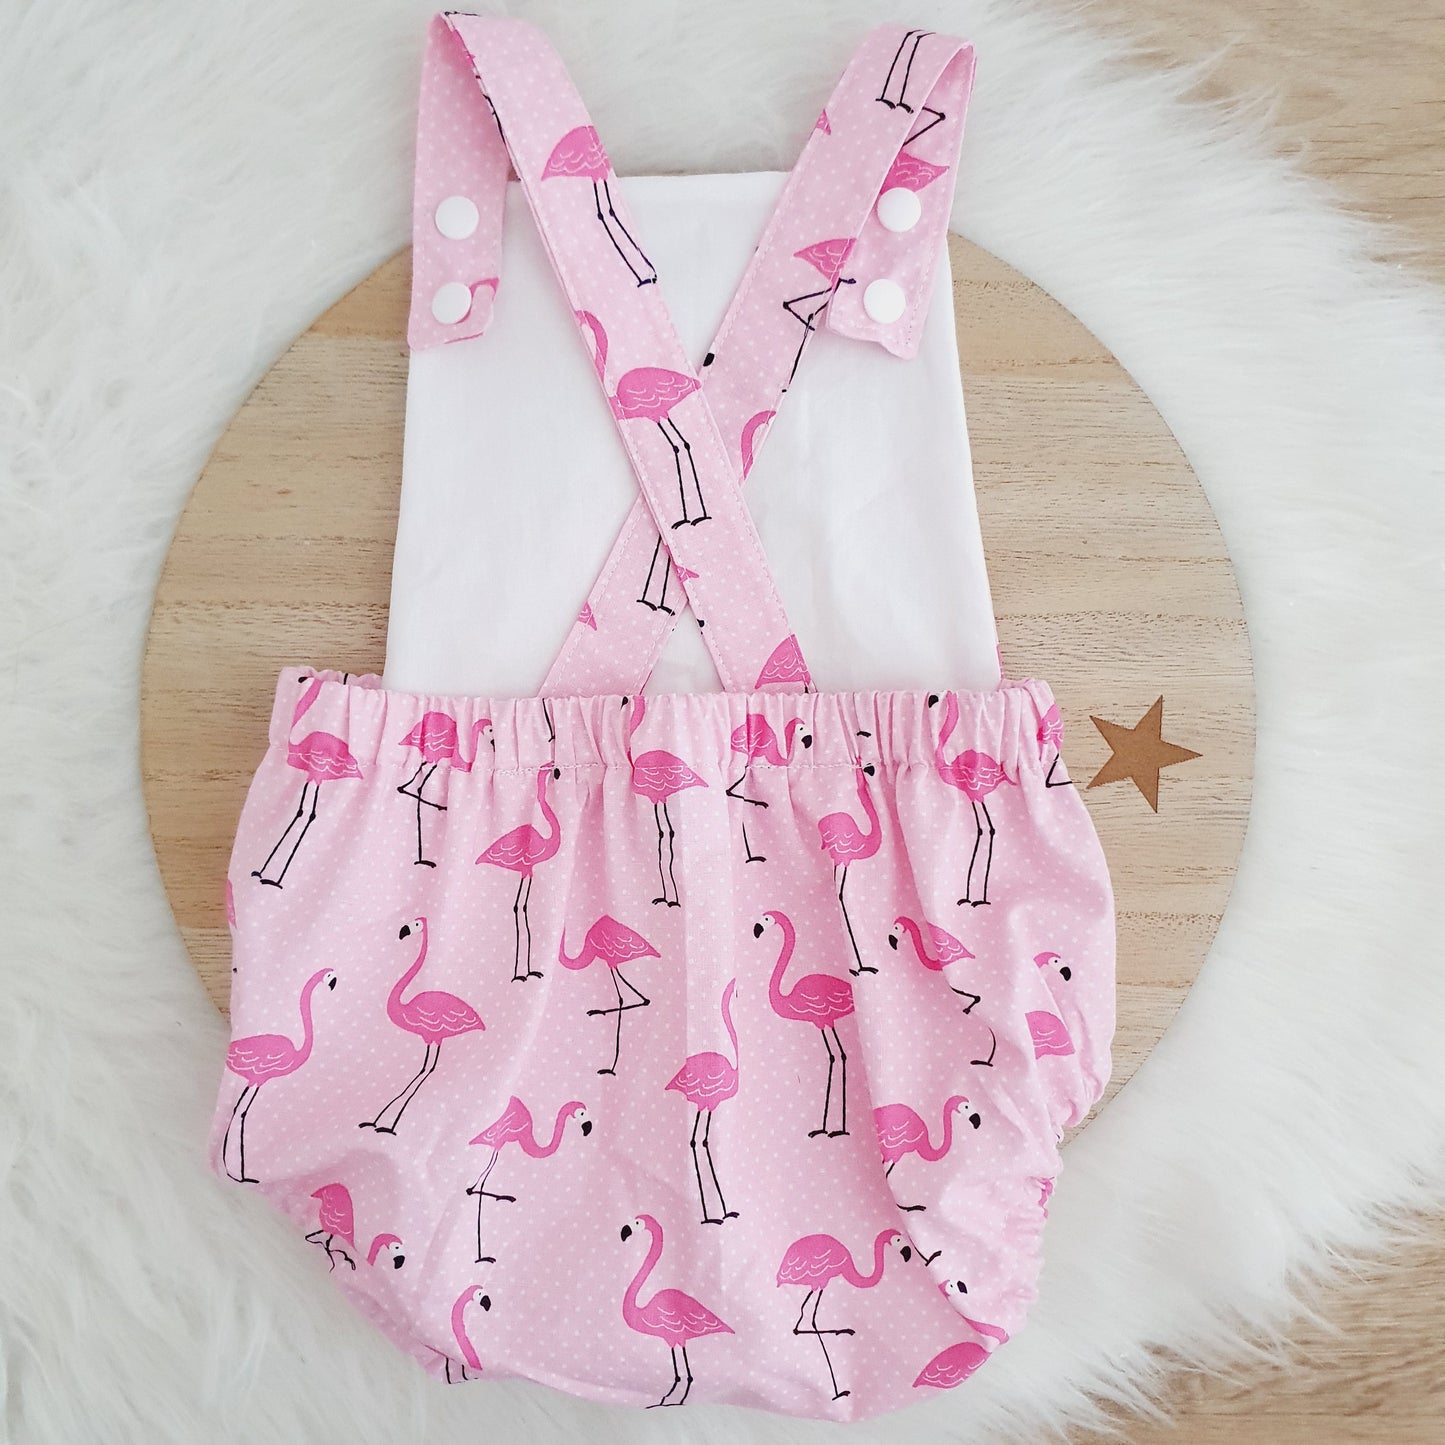 FLAMINGO Baby Romper, Handmade Baby Clothing, Size 0 - 1st Birthday Clothing / Cake Smash Outfit, 9 - 12 months